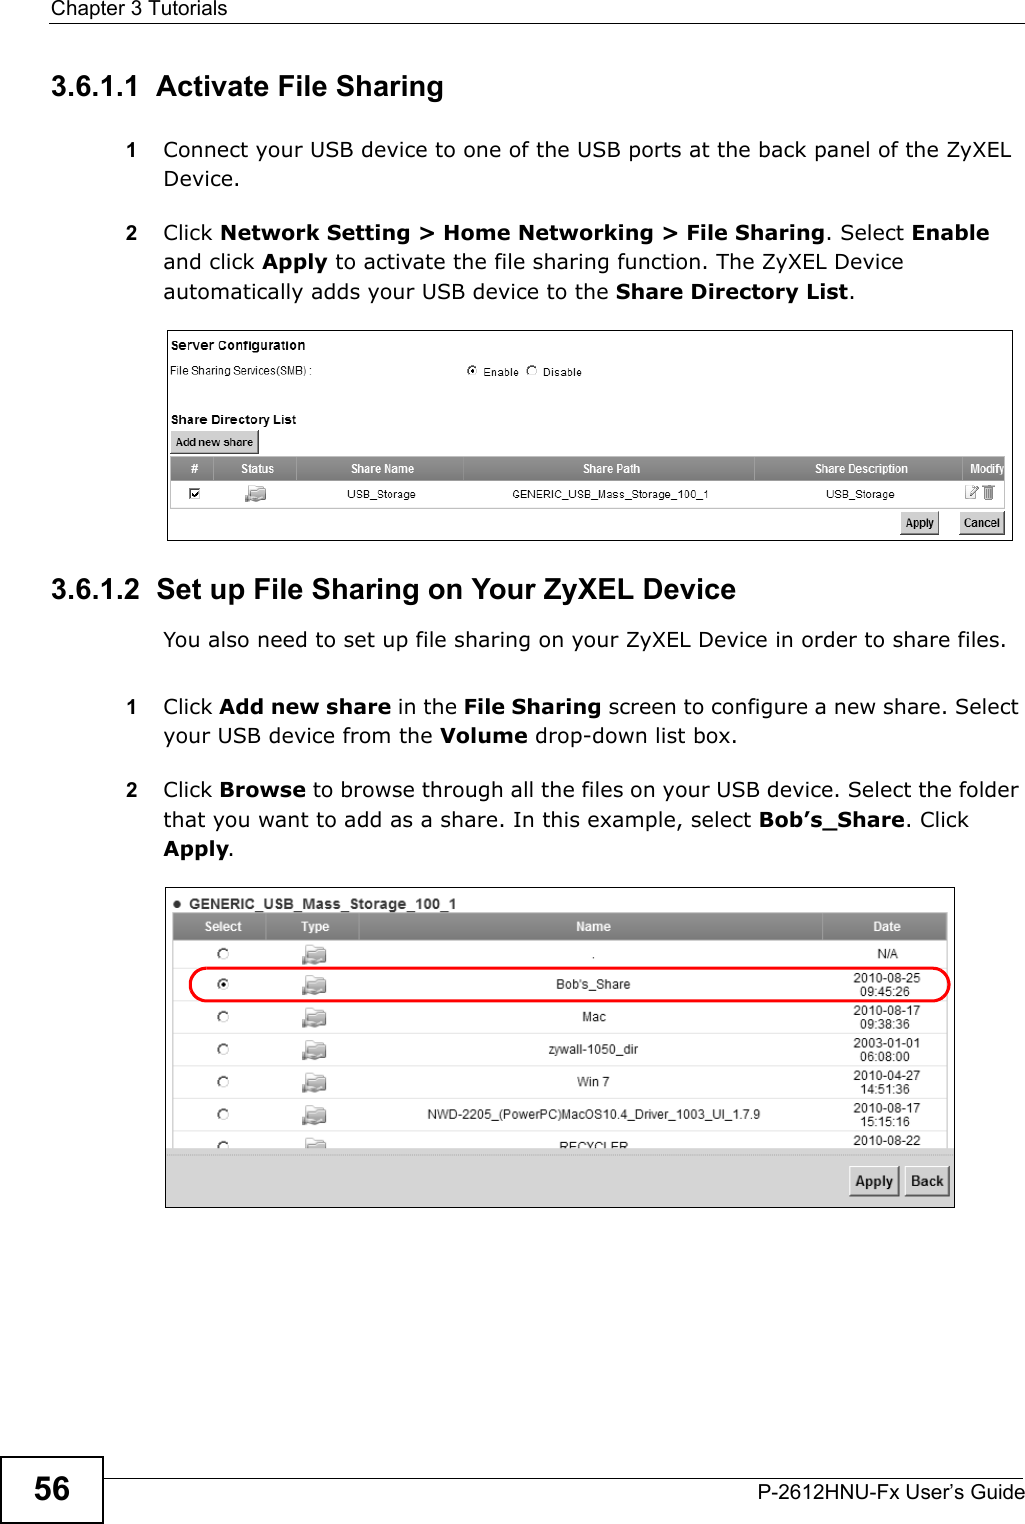 Chapter 3 TutorialsP-2612HNU-Fx User’s Guide563.6.1.1  Activate File Sharing1Connect your USB device to one of the USB ports at the back panel of the ZyXEL Device. 2Click Network Setting &gt; Home Networking &gt; File Sharing. Select Enableand click Apply to activate the file sharing function. The ZyXEL Device automatically adds your USB device to the Share Directory List.3.6.1.2  Set up File Sharing on Your ZyXEL Device You also need to set up file sharing on your ZyXEL Device in order to share files.1Click Add new share in the File Sharing screen to configure a new share. Selectyour USB device from the Volume drop-down list box.2Click Browse to browse through all the files on your USB device. Select the folder that you want to add as a share. In this example, select Bob’s_Share. Click Apply.